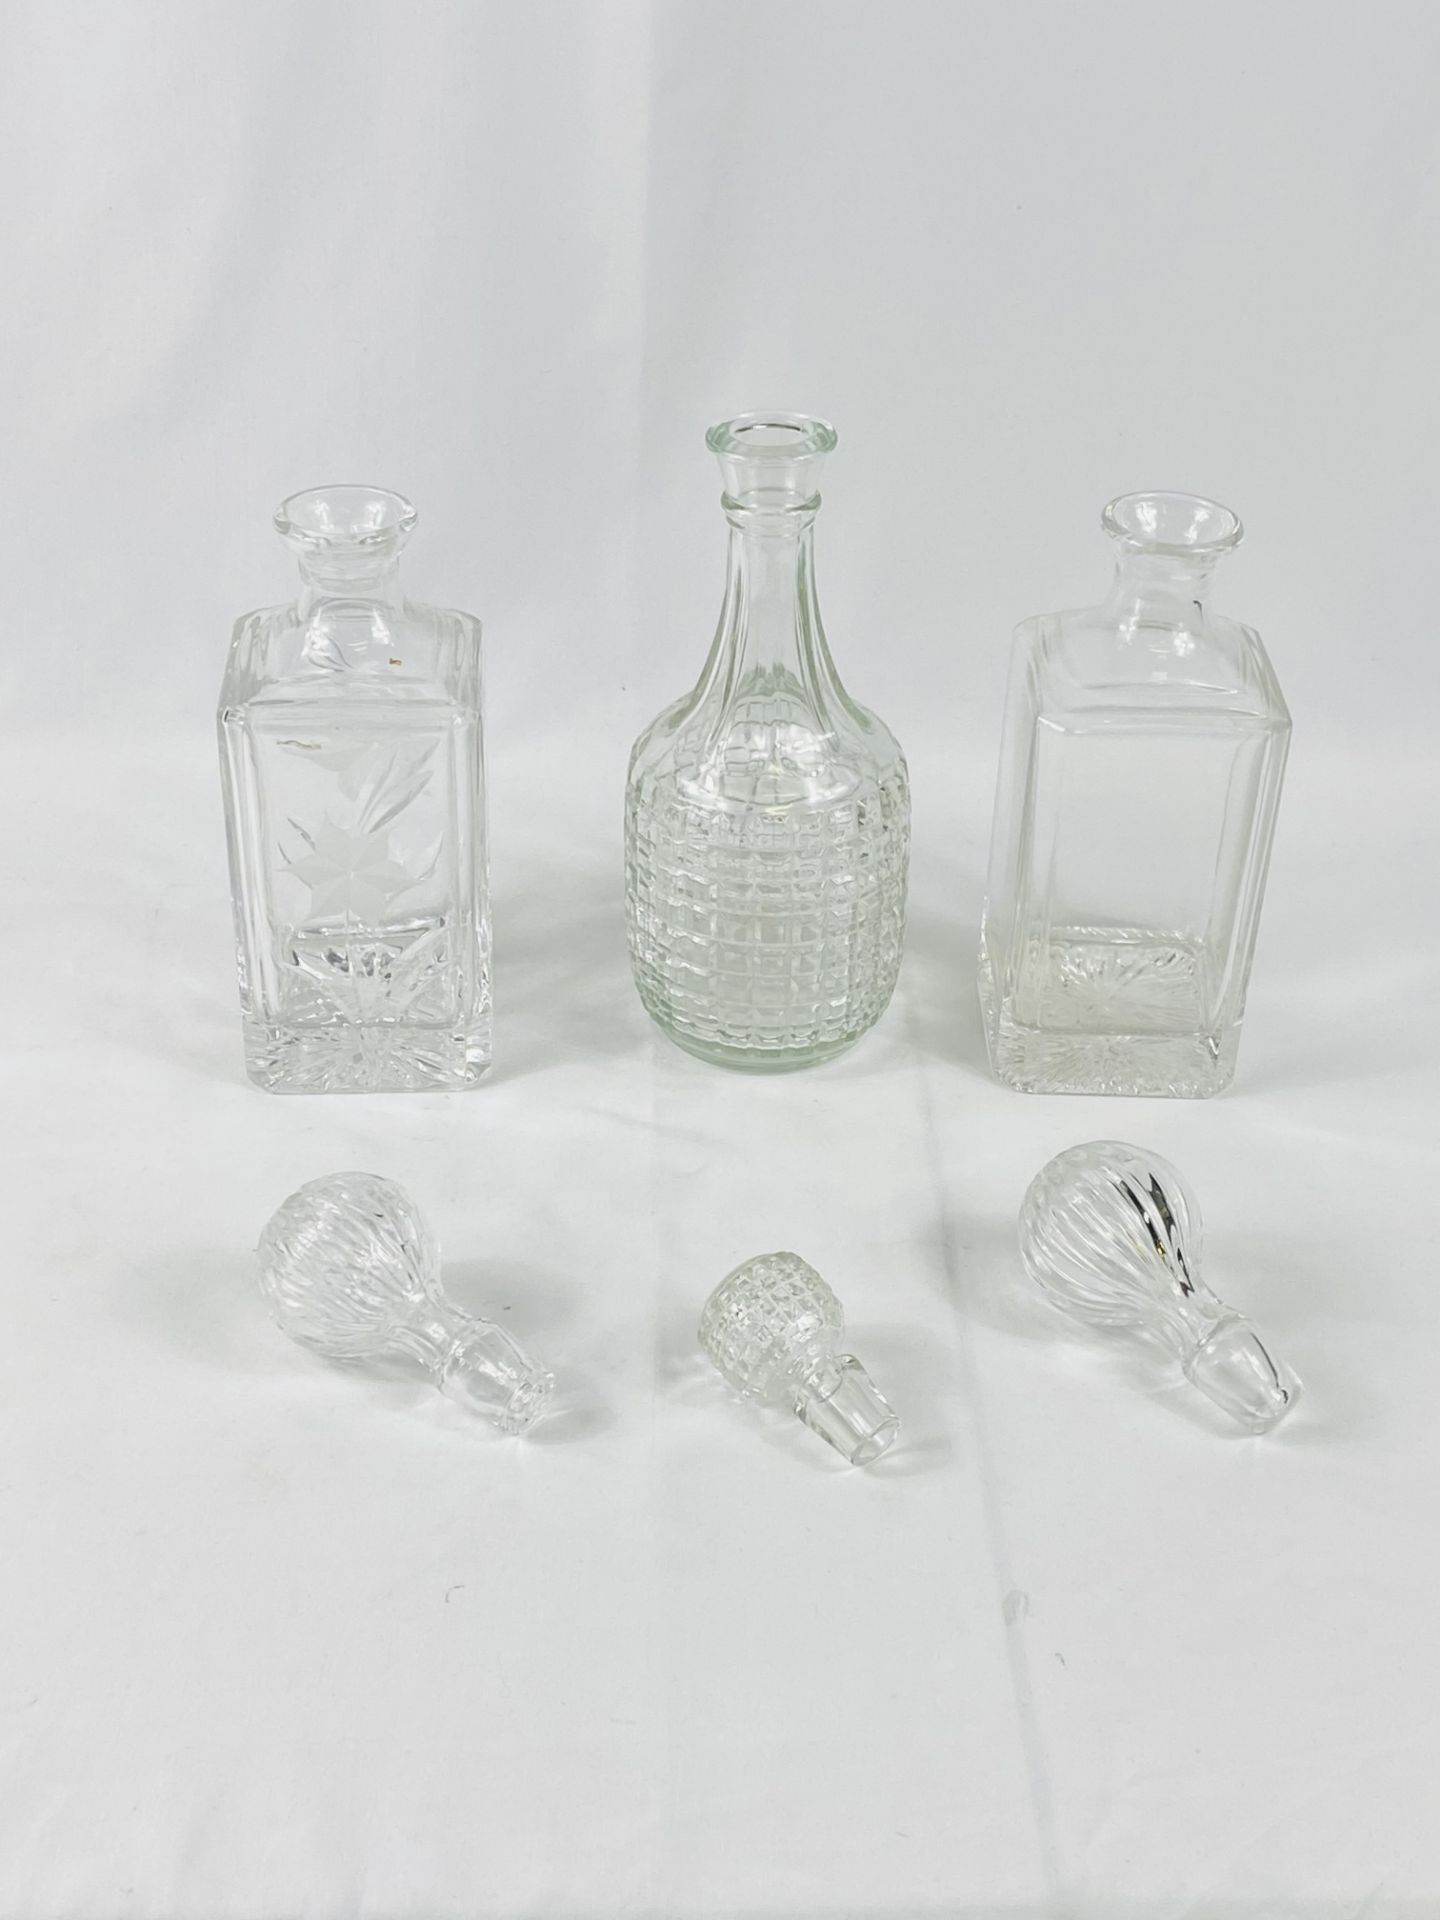 Two cut glass decanters together with a moulded glass decanter - Image 3 of 3